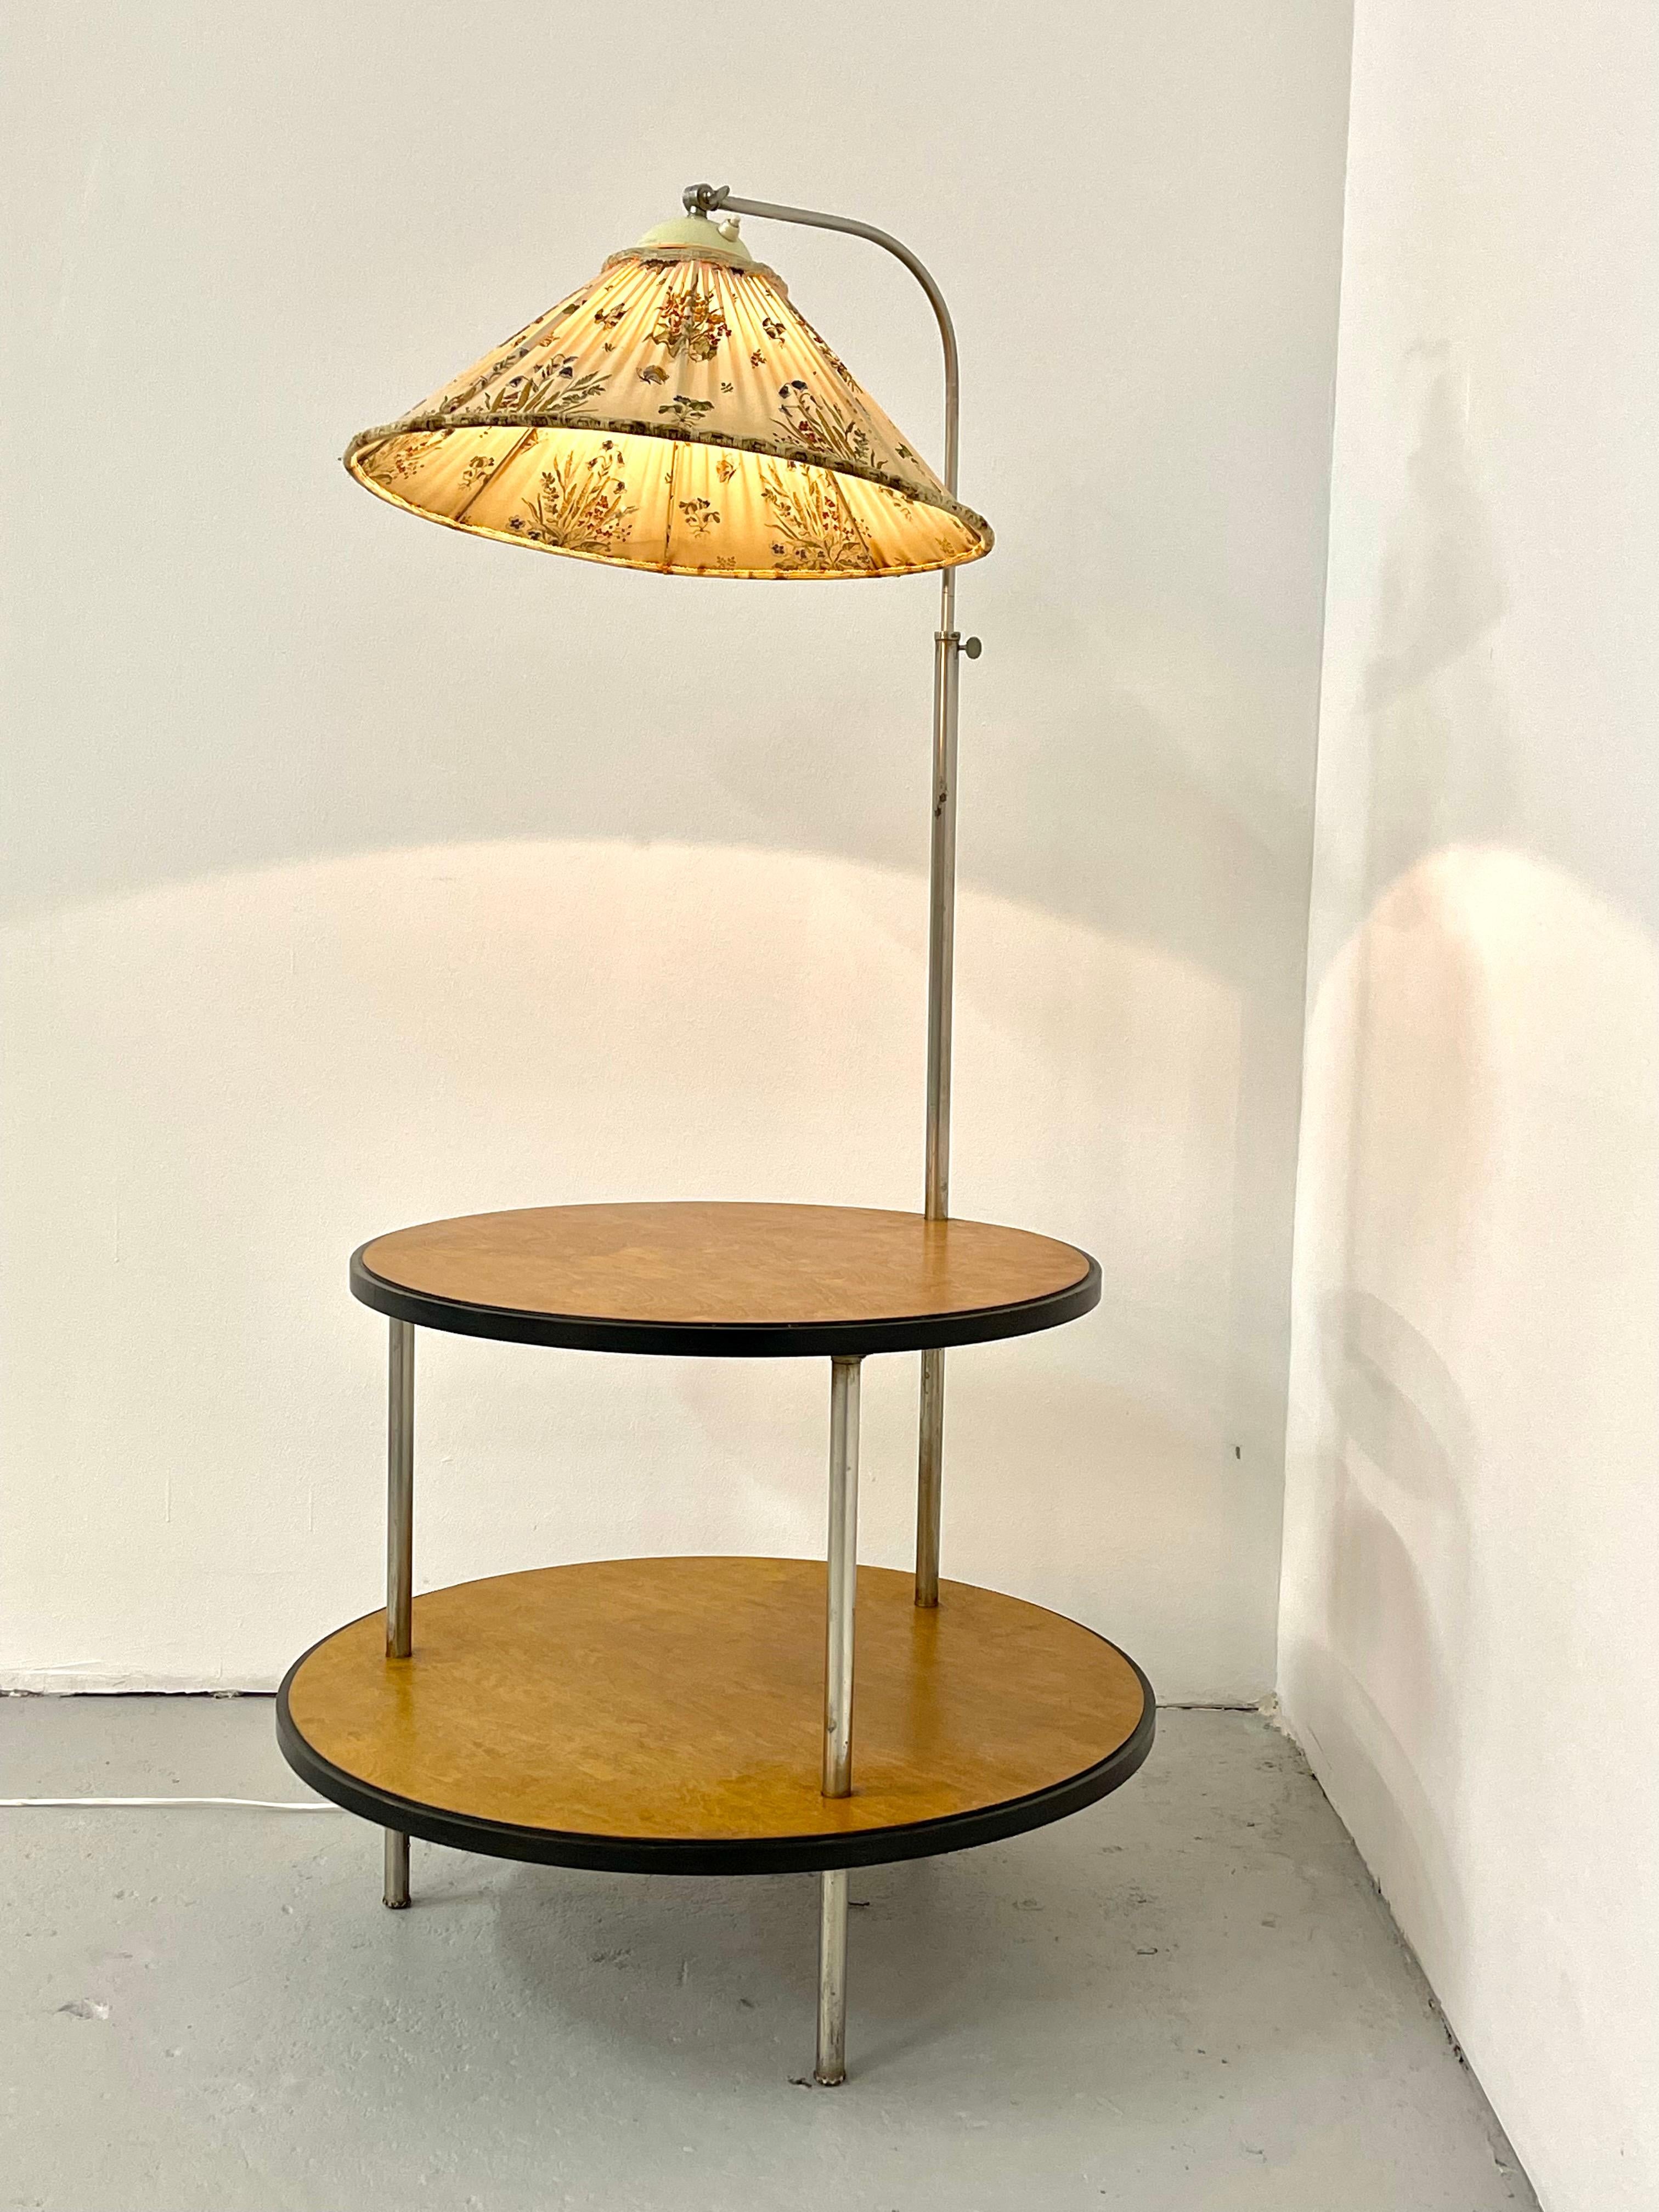 A rare adjustable light arm table, designed by Axel Einar Hjorth 1934, executed by Nordiska Kompaniet in Stockholm. Tubular steel and round birch trays, diameter 55 & 65 cm.
Maximum height of the adjustable light arm 135cm.
the table height is 52